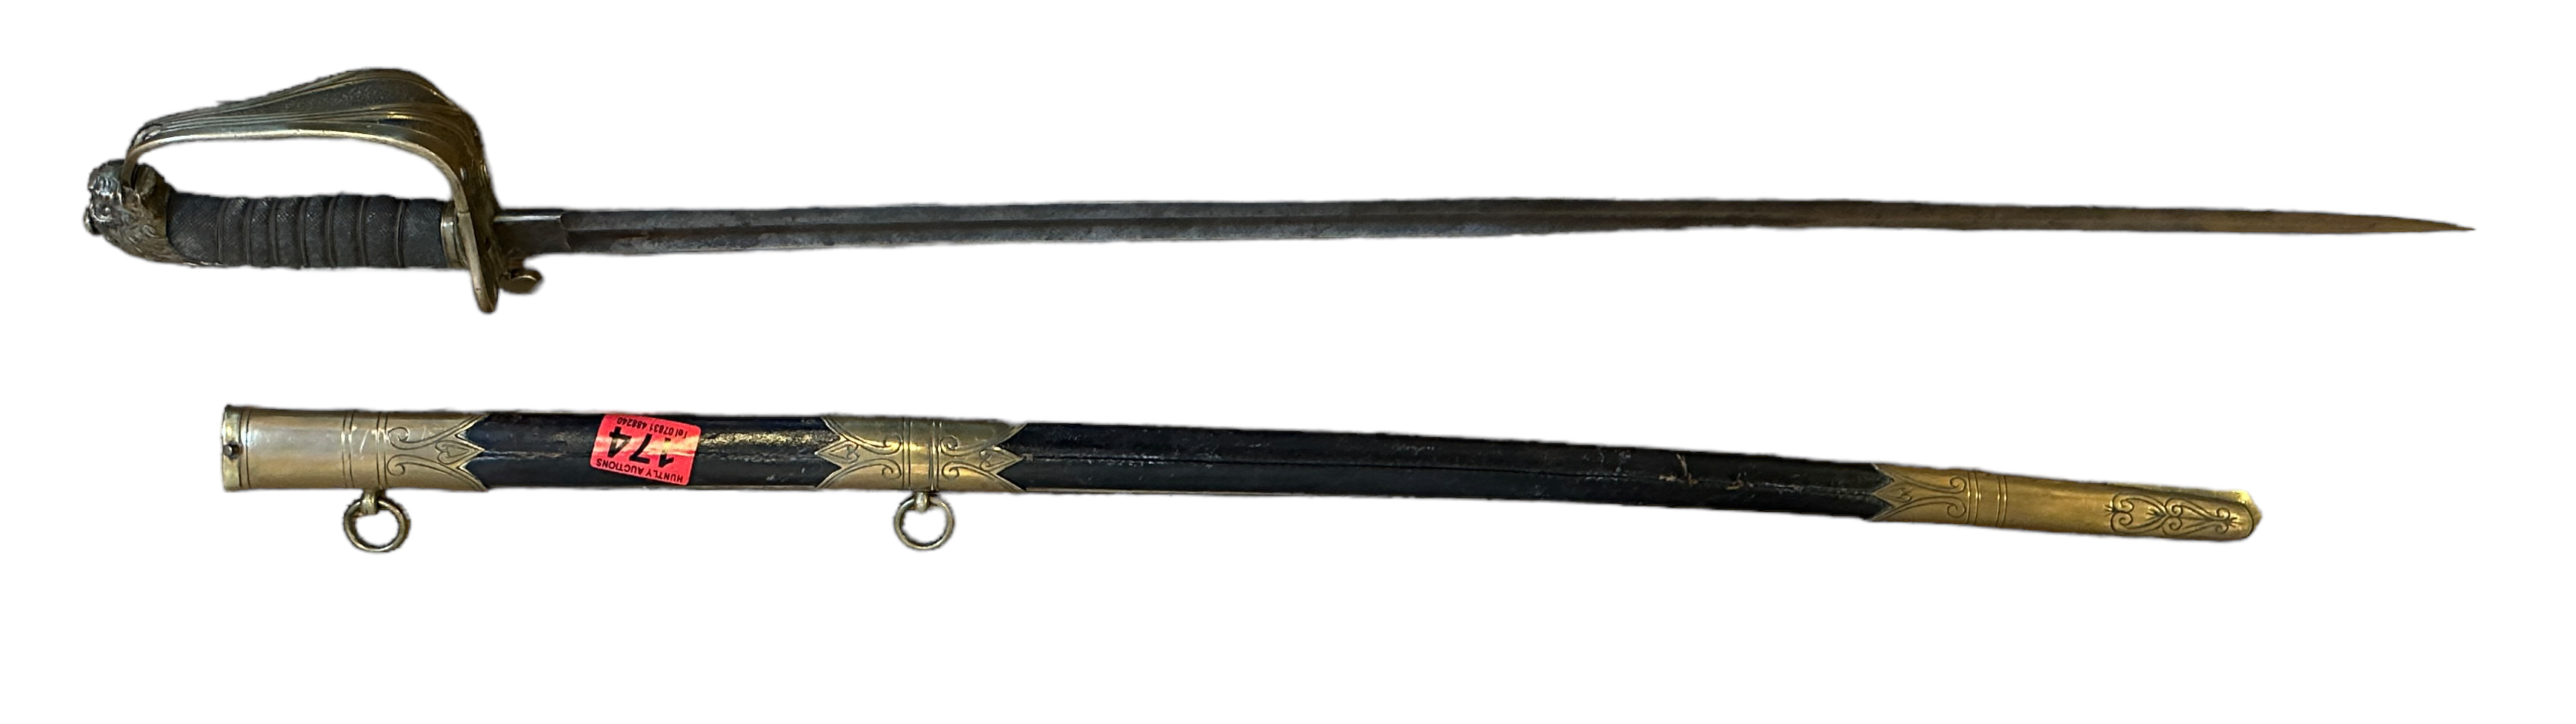 Antique British Naval Sword - blade 32" long and overall length 38".